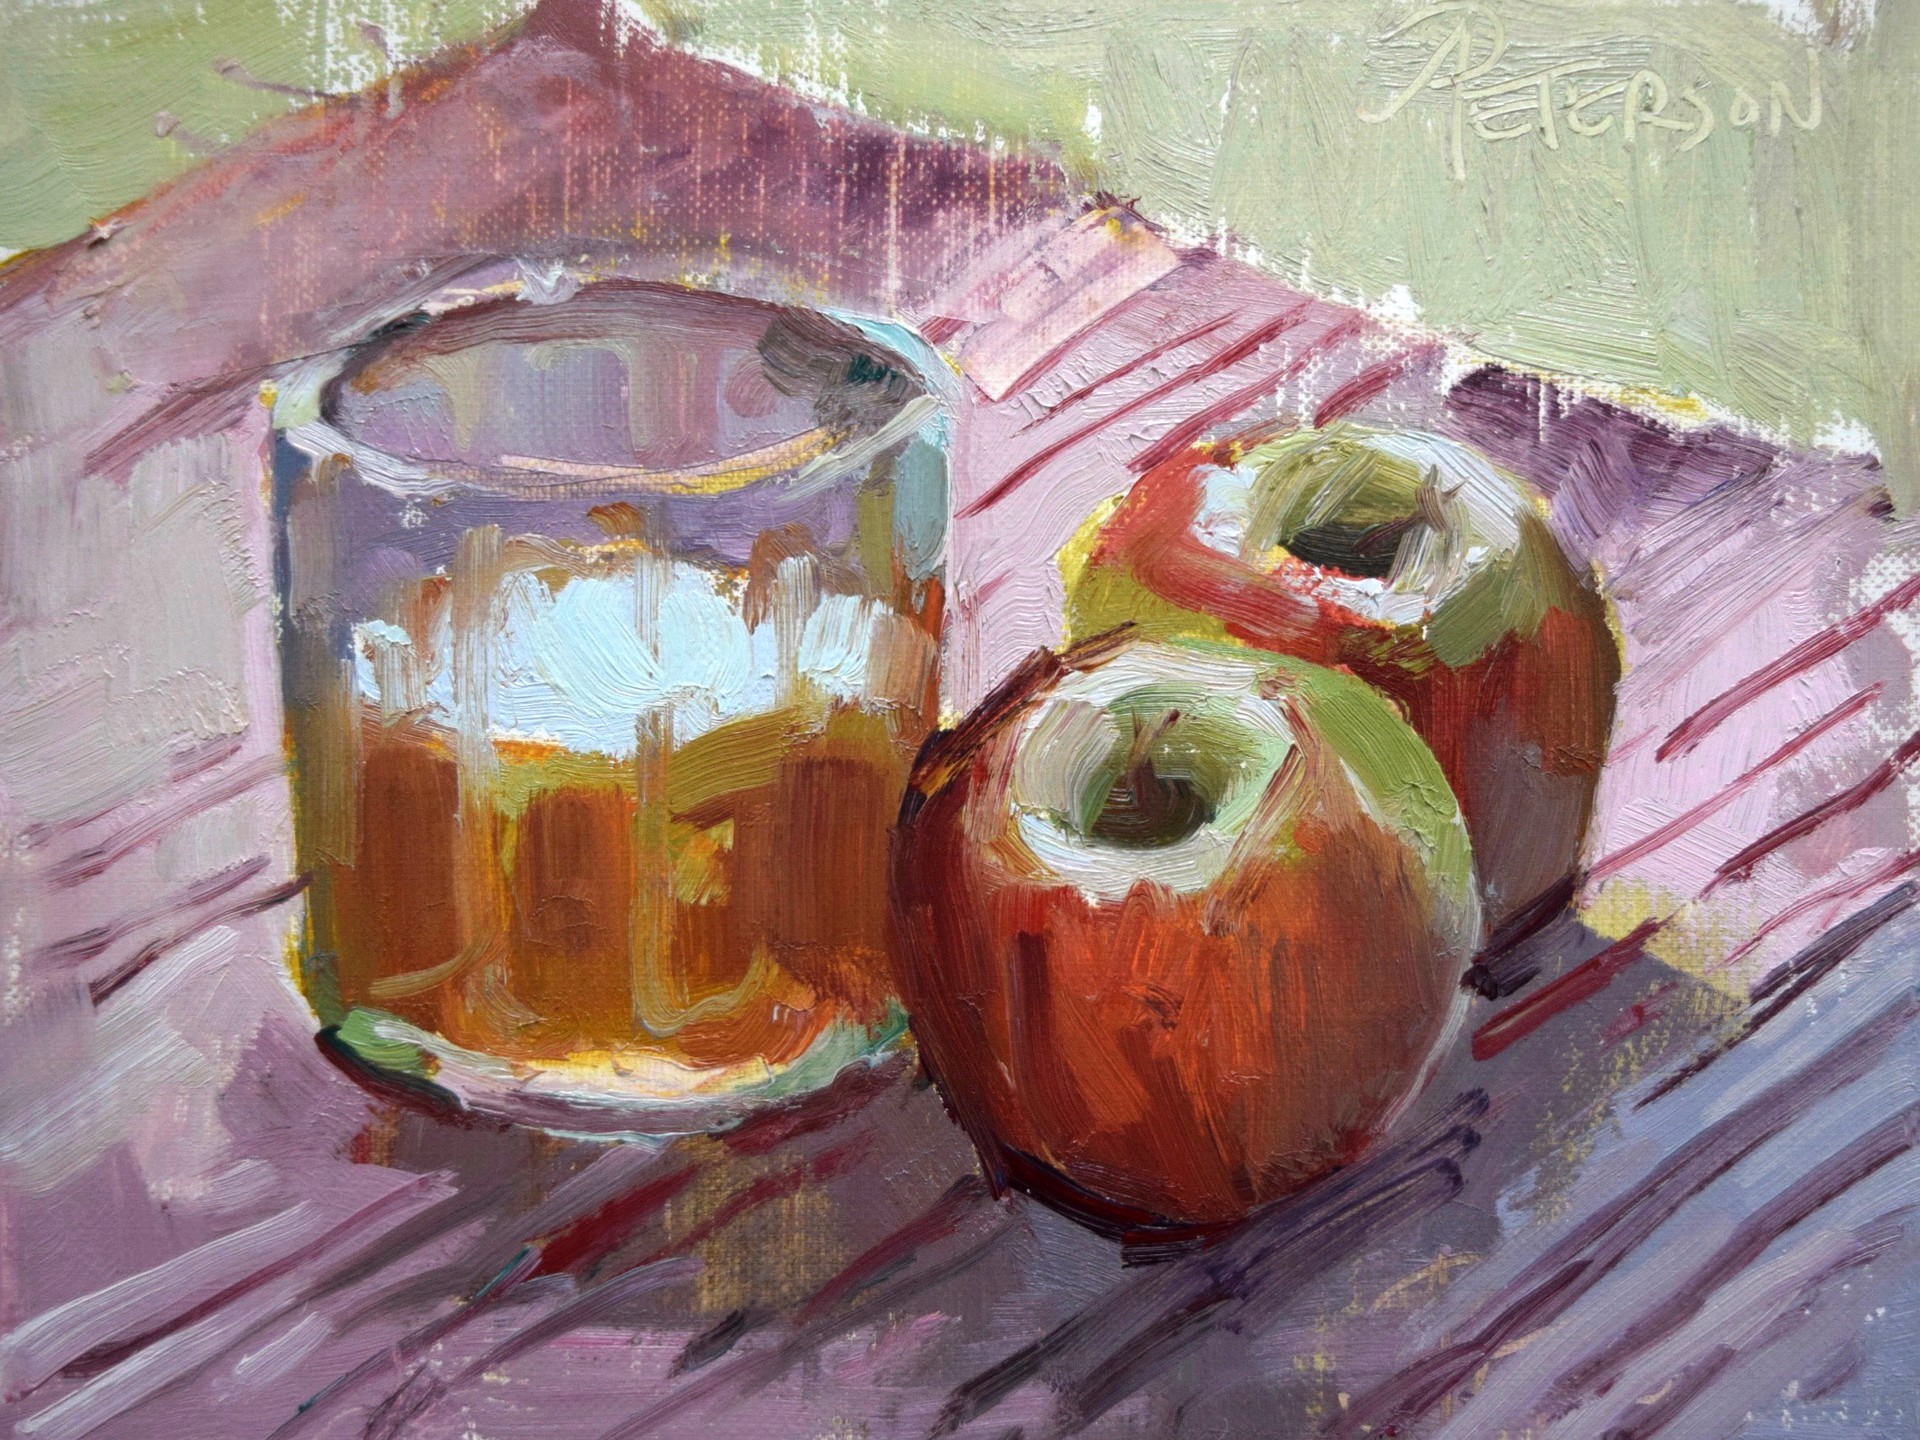 Tumbler and Apples by Amy R. Peterson